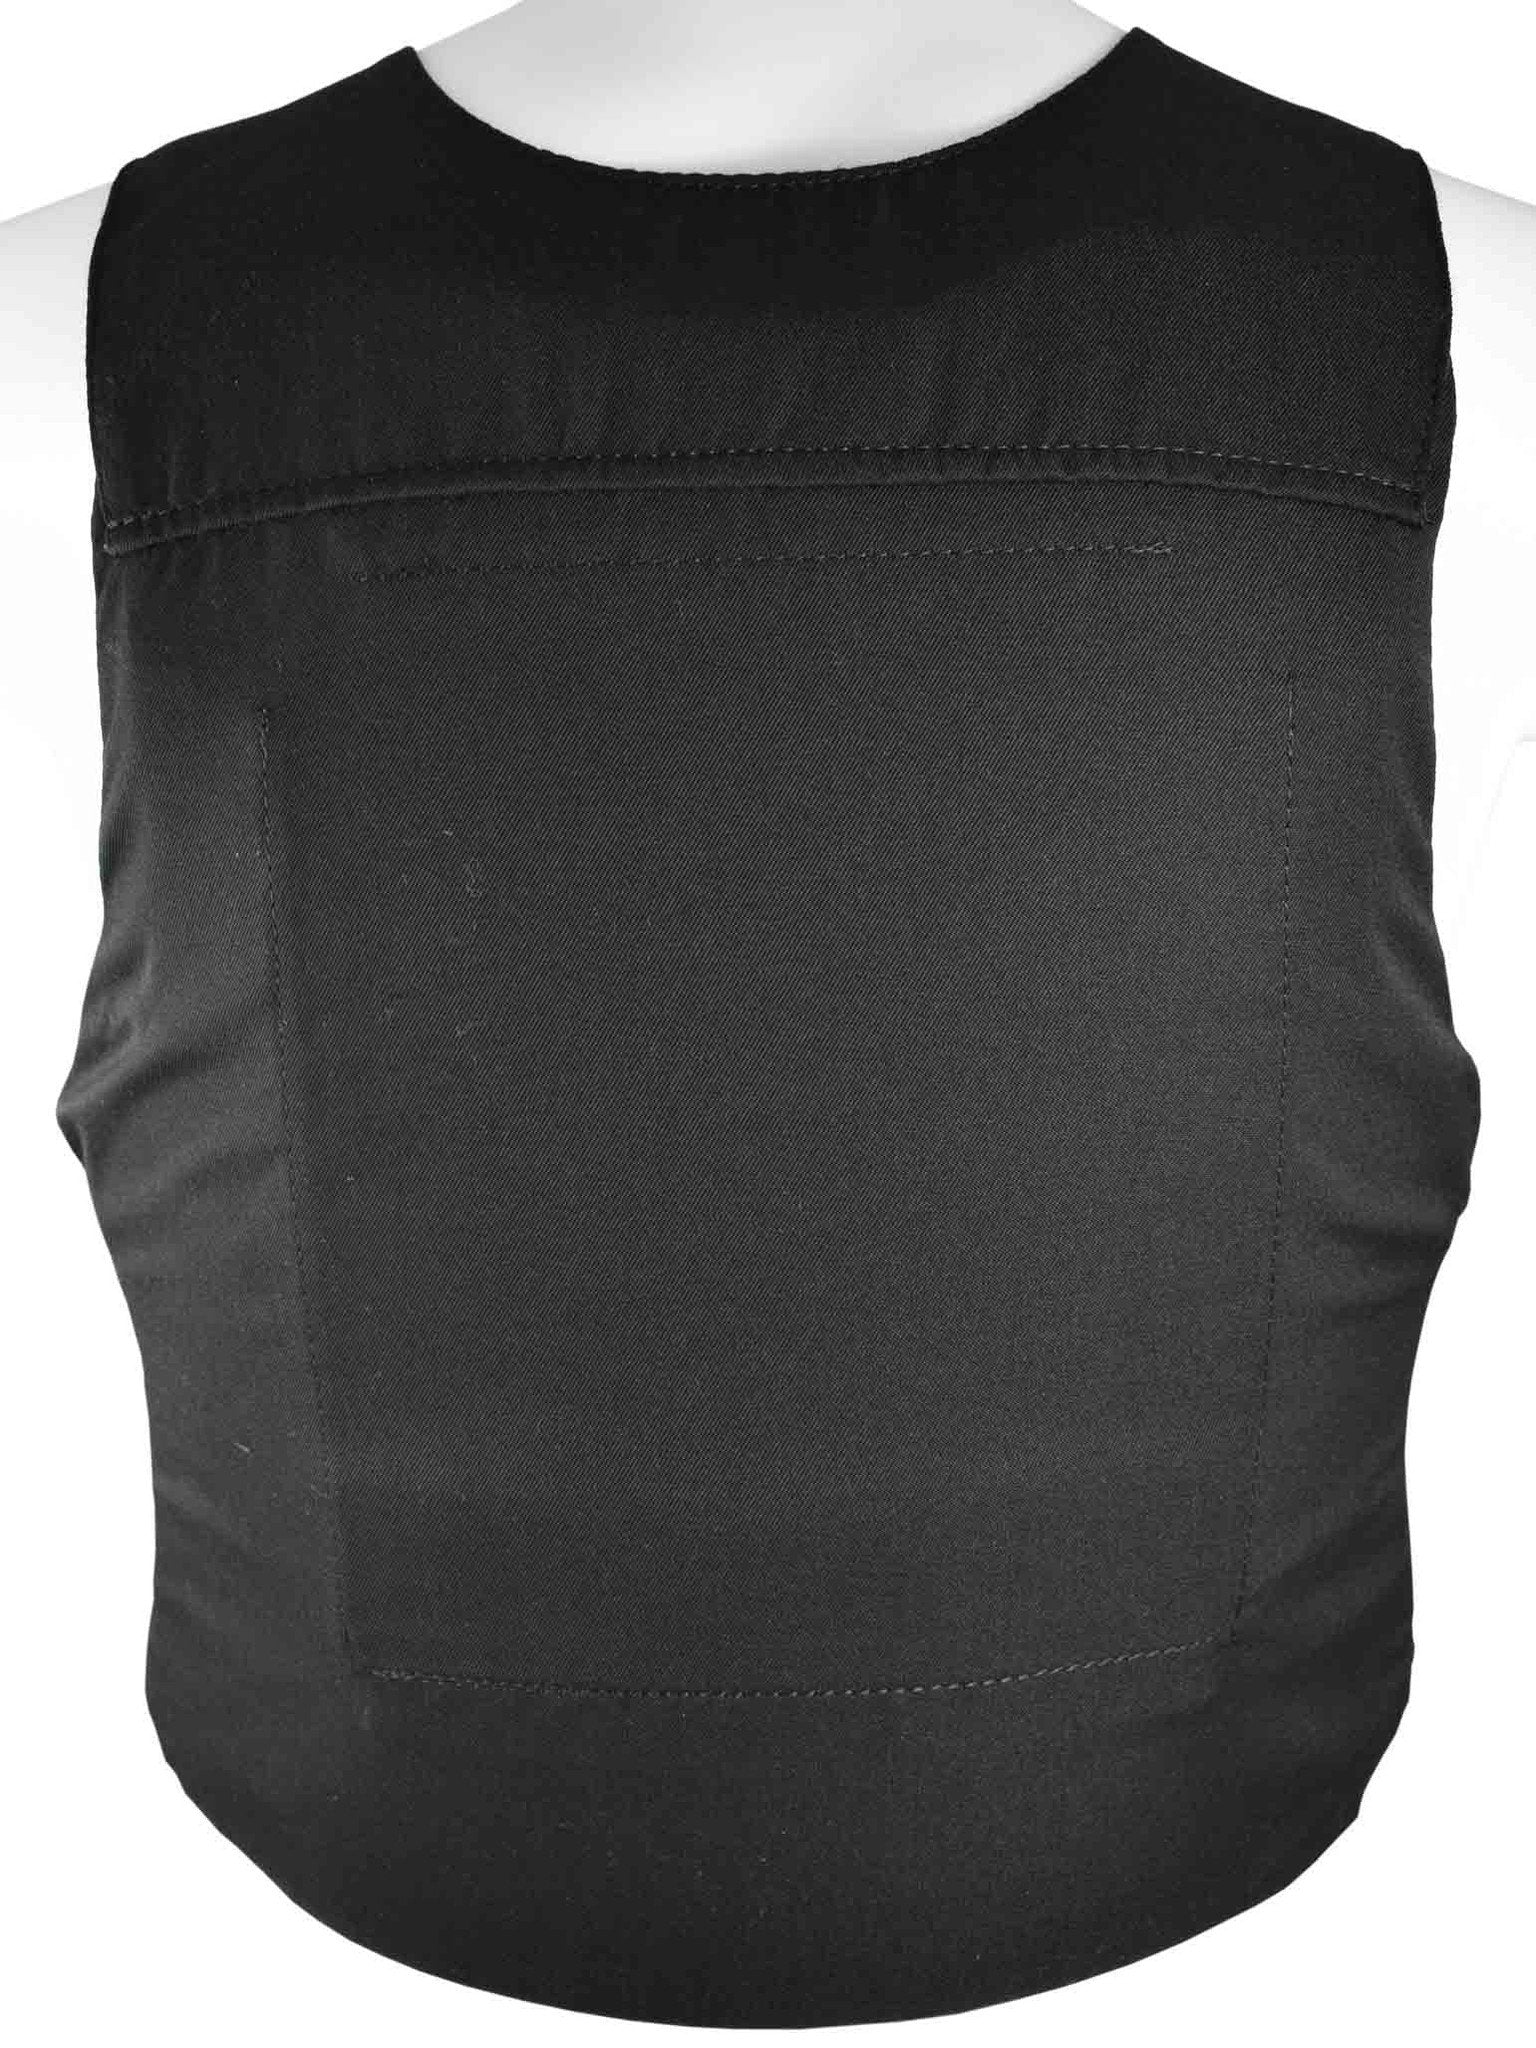 Protection Group Denmark Level IIIA Concealed Bullet Proof Vest ...